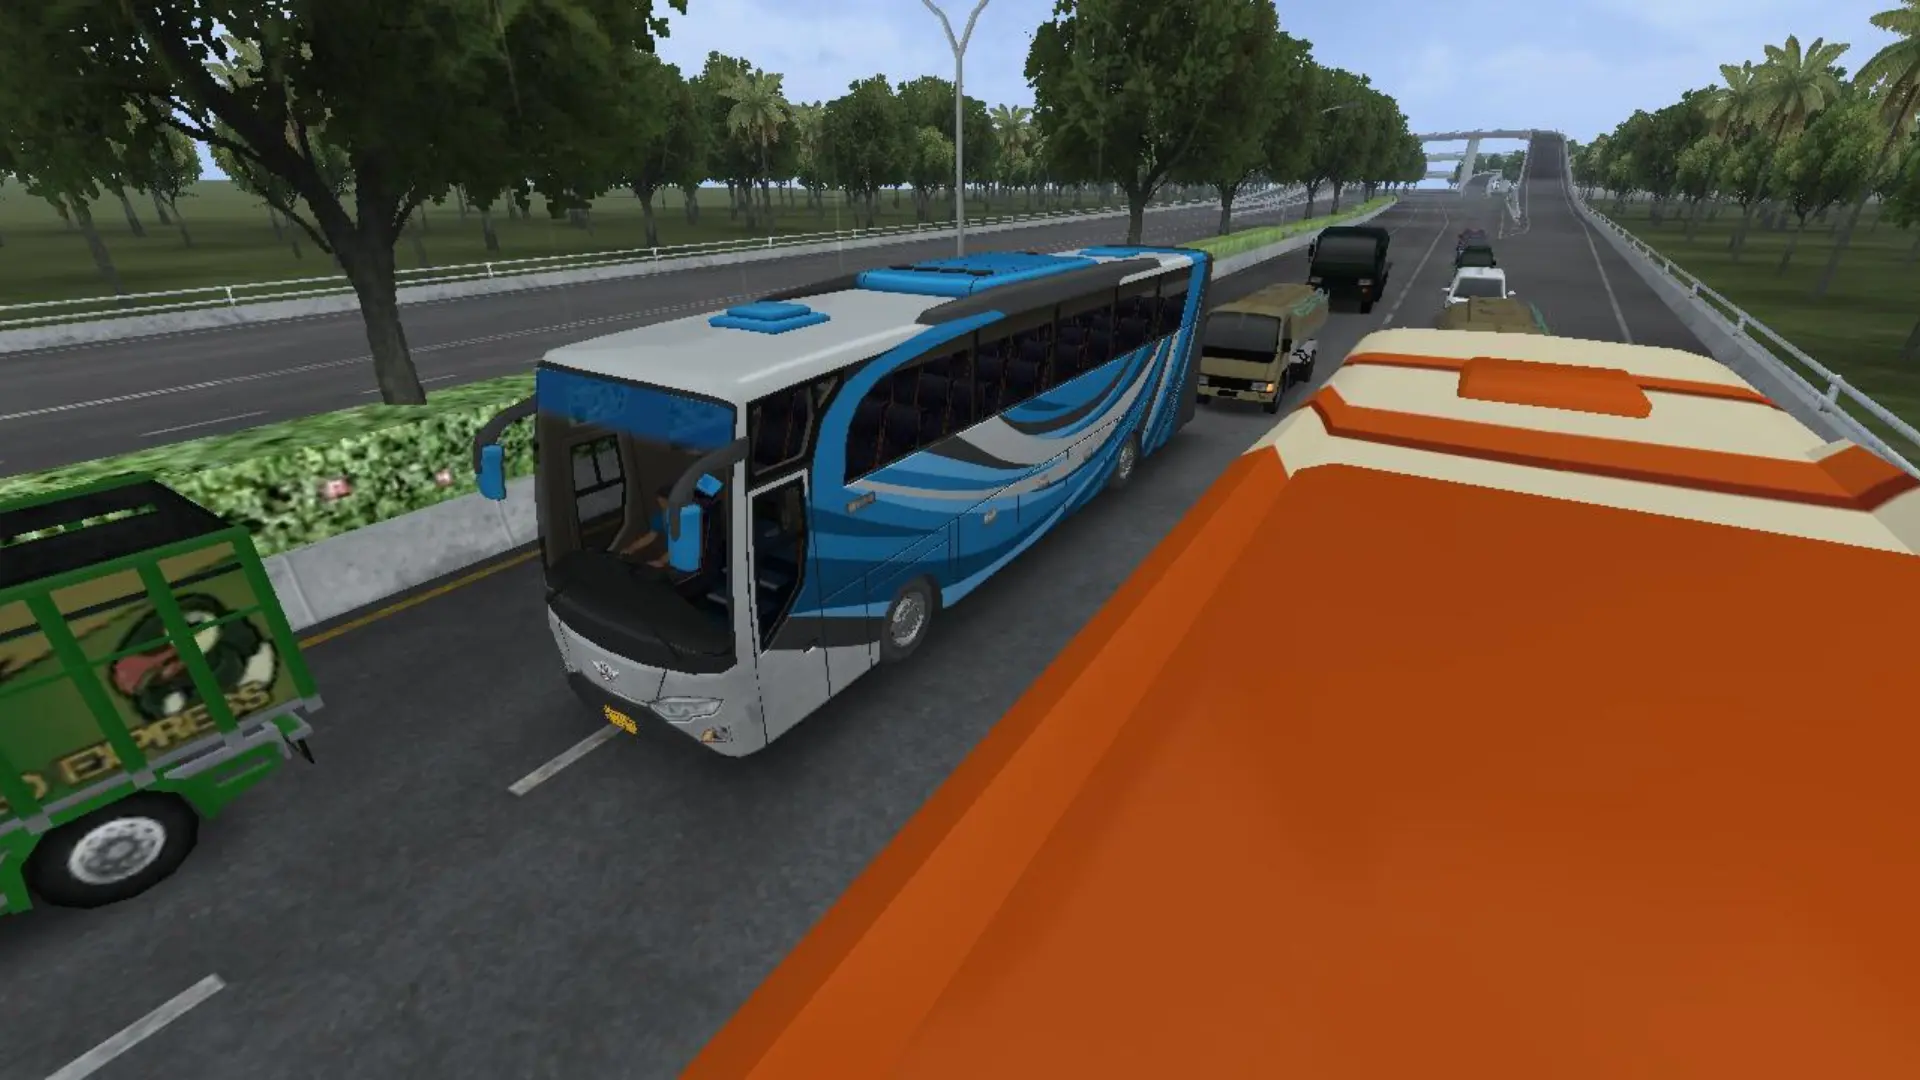 Screenshots from the Bus Simulator Indonesia mod apk showing the virtual bus travelling on the road